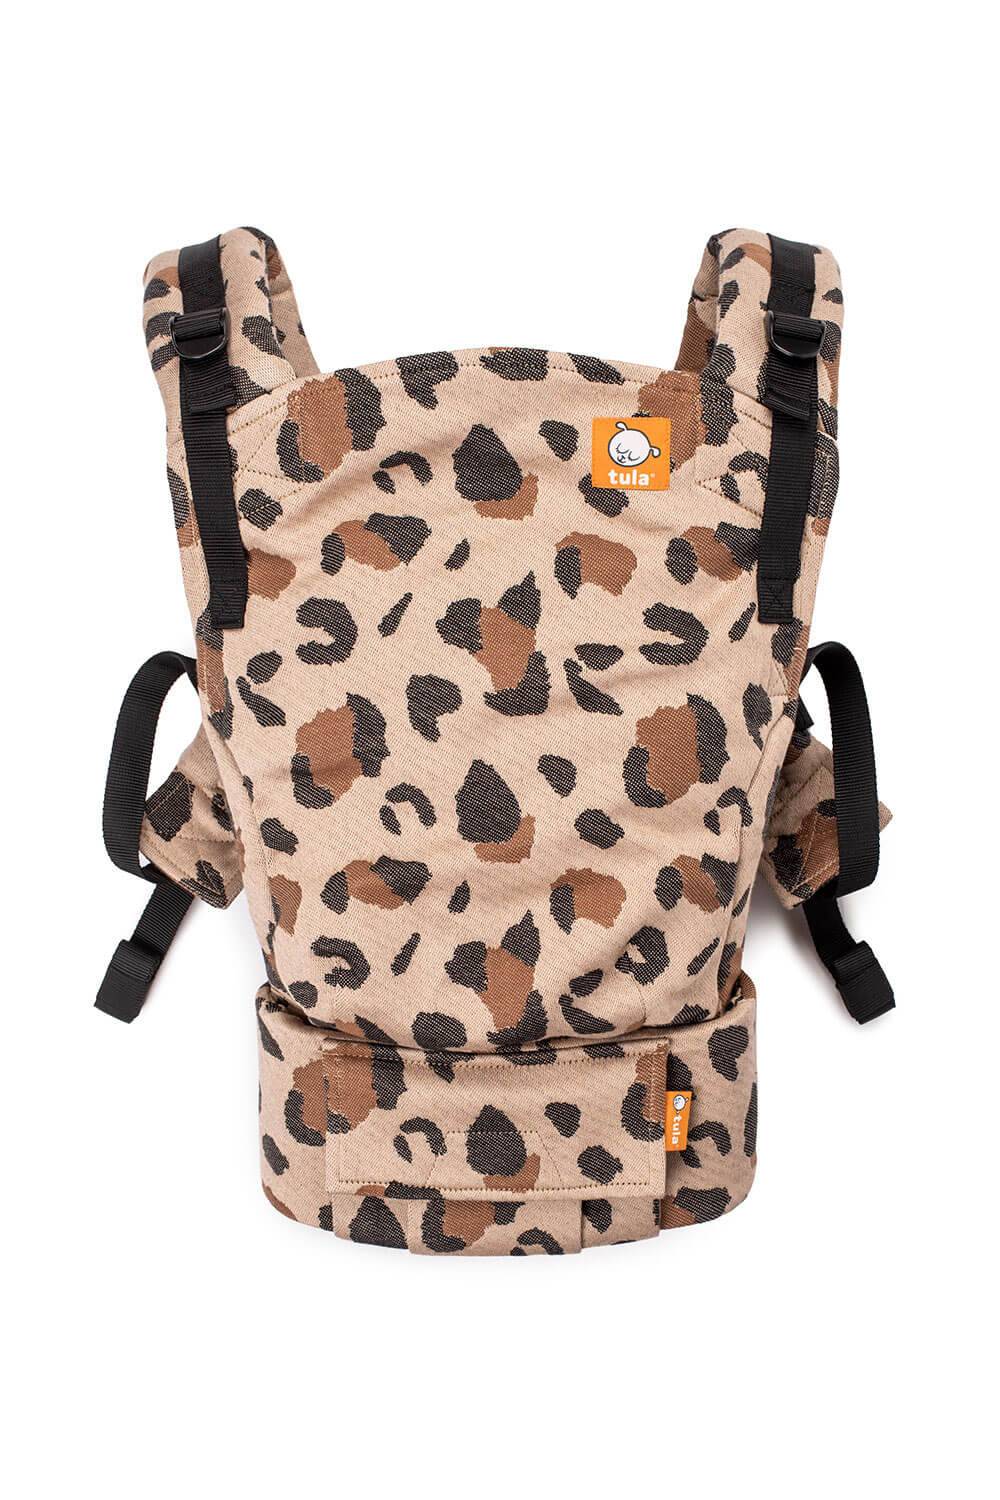 Safari Leopard - Signature Woven Free-to-Grow Baby Carrier